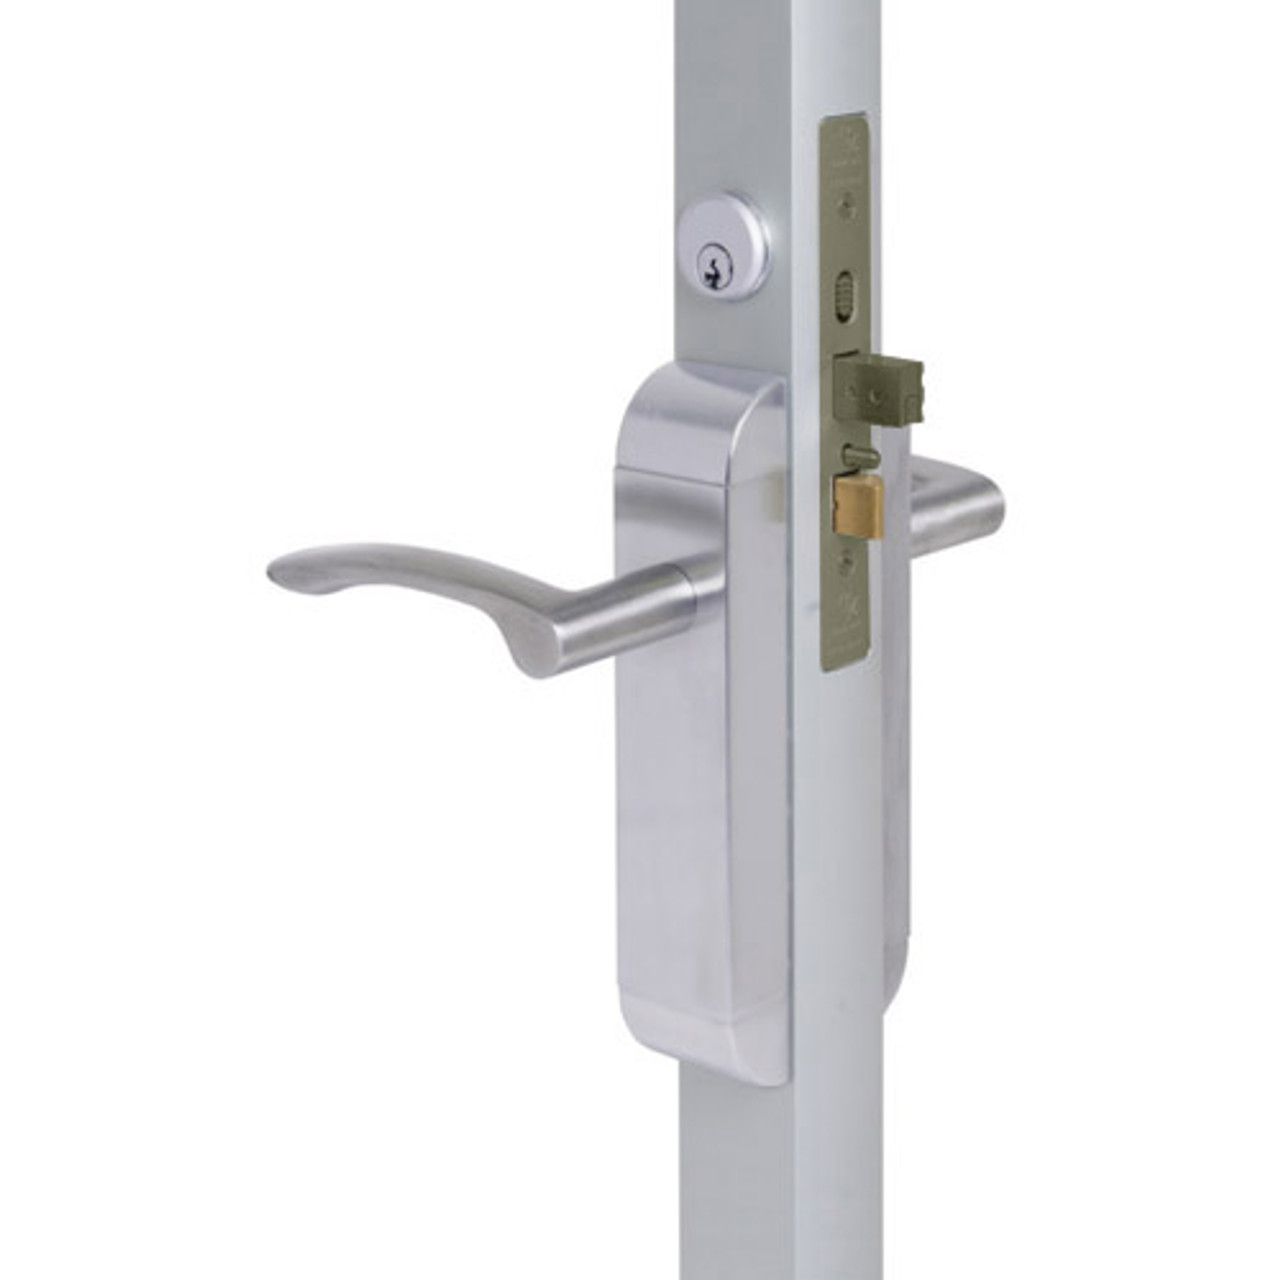 2290-312-302-32 Adams Rite Dual Force Interconnected 2290 series Deadlock/Deadlatch in Bright Stainless